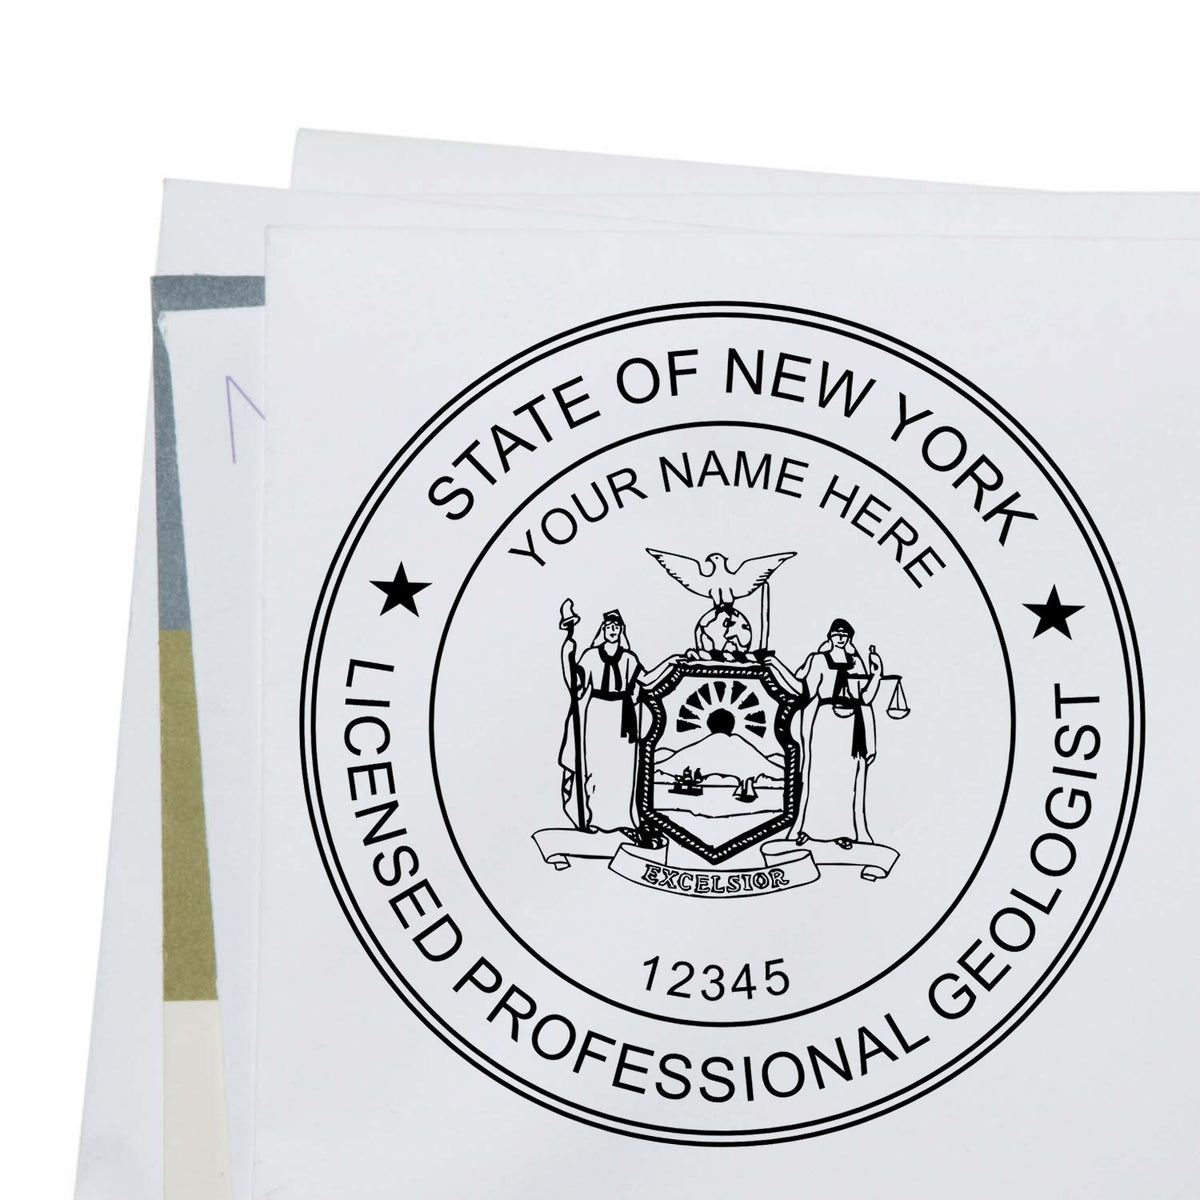 This paper is stamped with a sample imprint of the Premium MaxLight Pre-Inked New York Geology Stamp, signifying its quality and reliability.